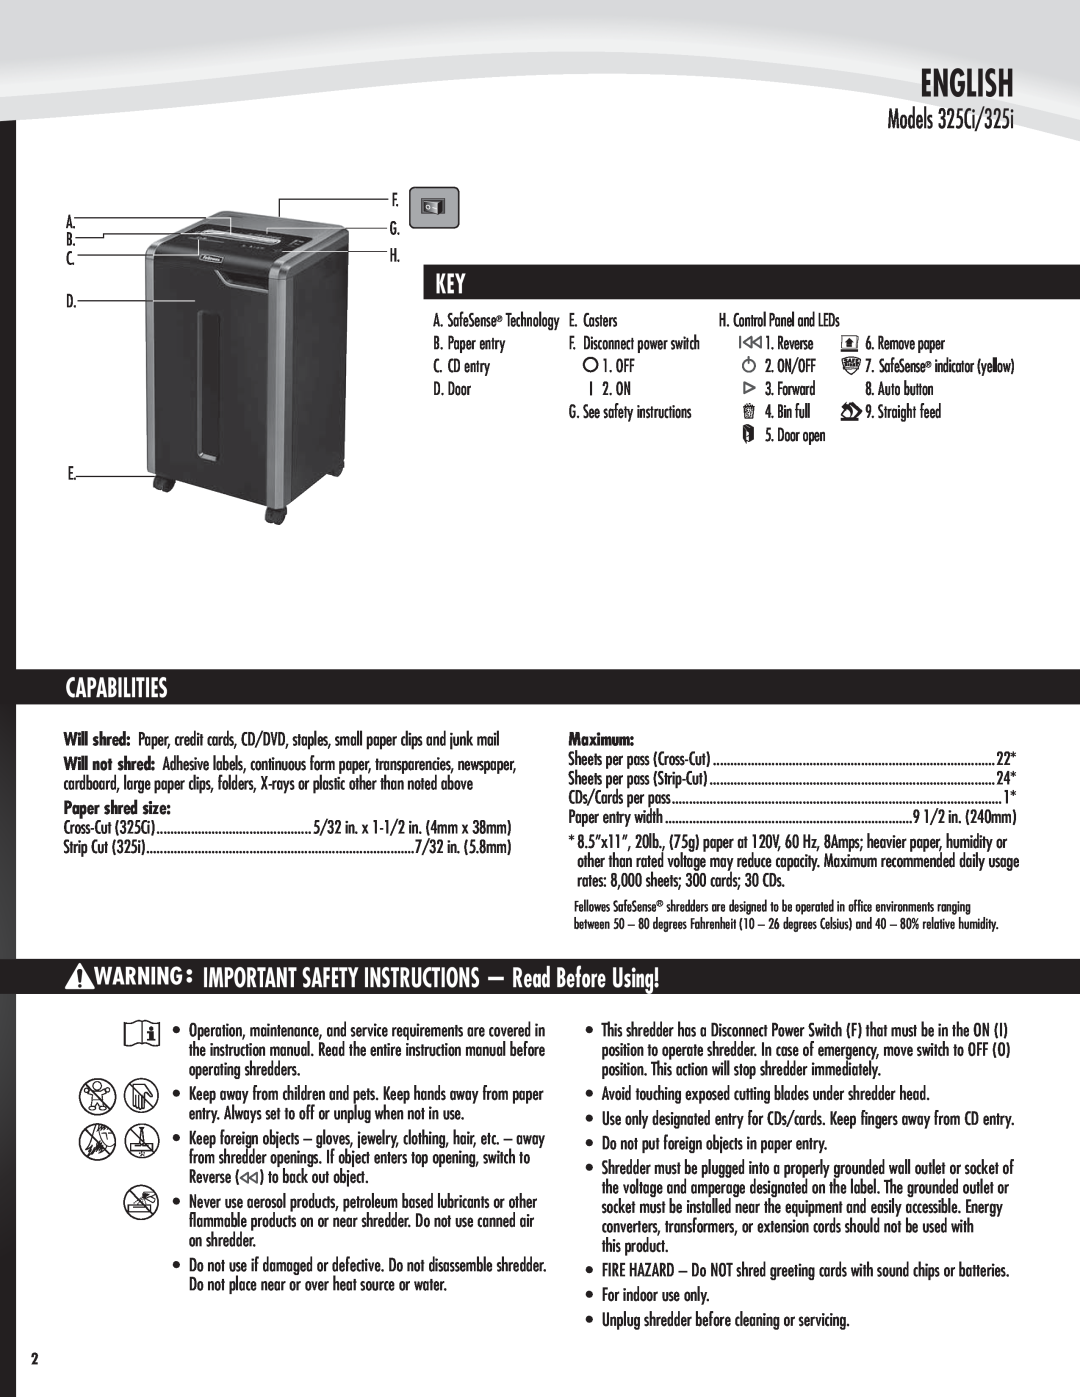 Fellowes English, Capabilities, IMPORTANT SAFETY INSTRUCTIONS - Read Before Using, Models 325Ci/325i, Paper shred size 